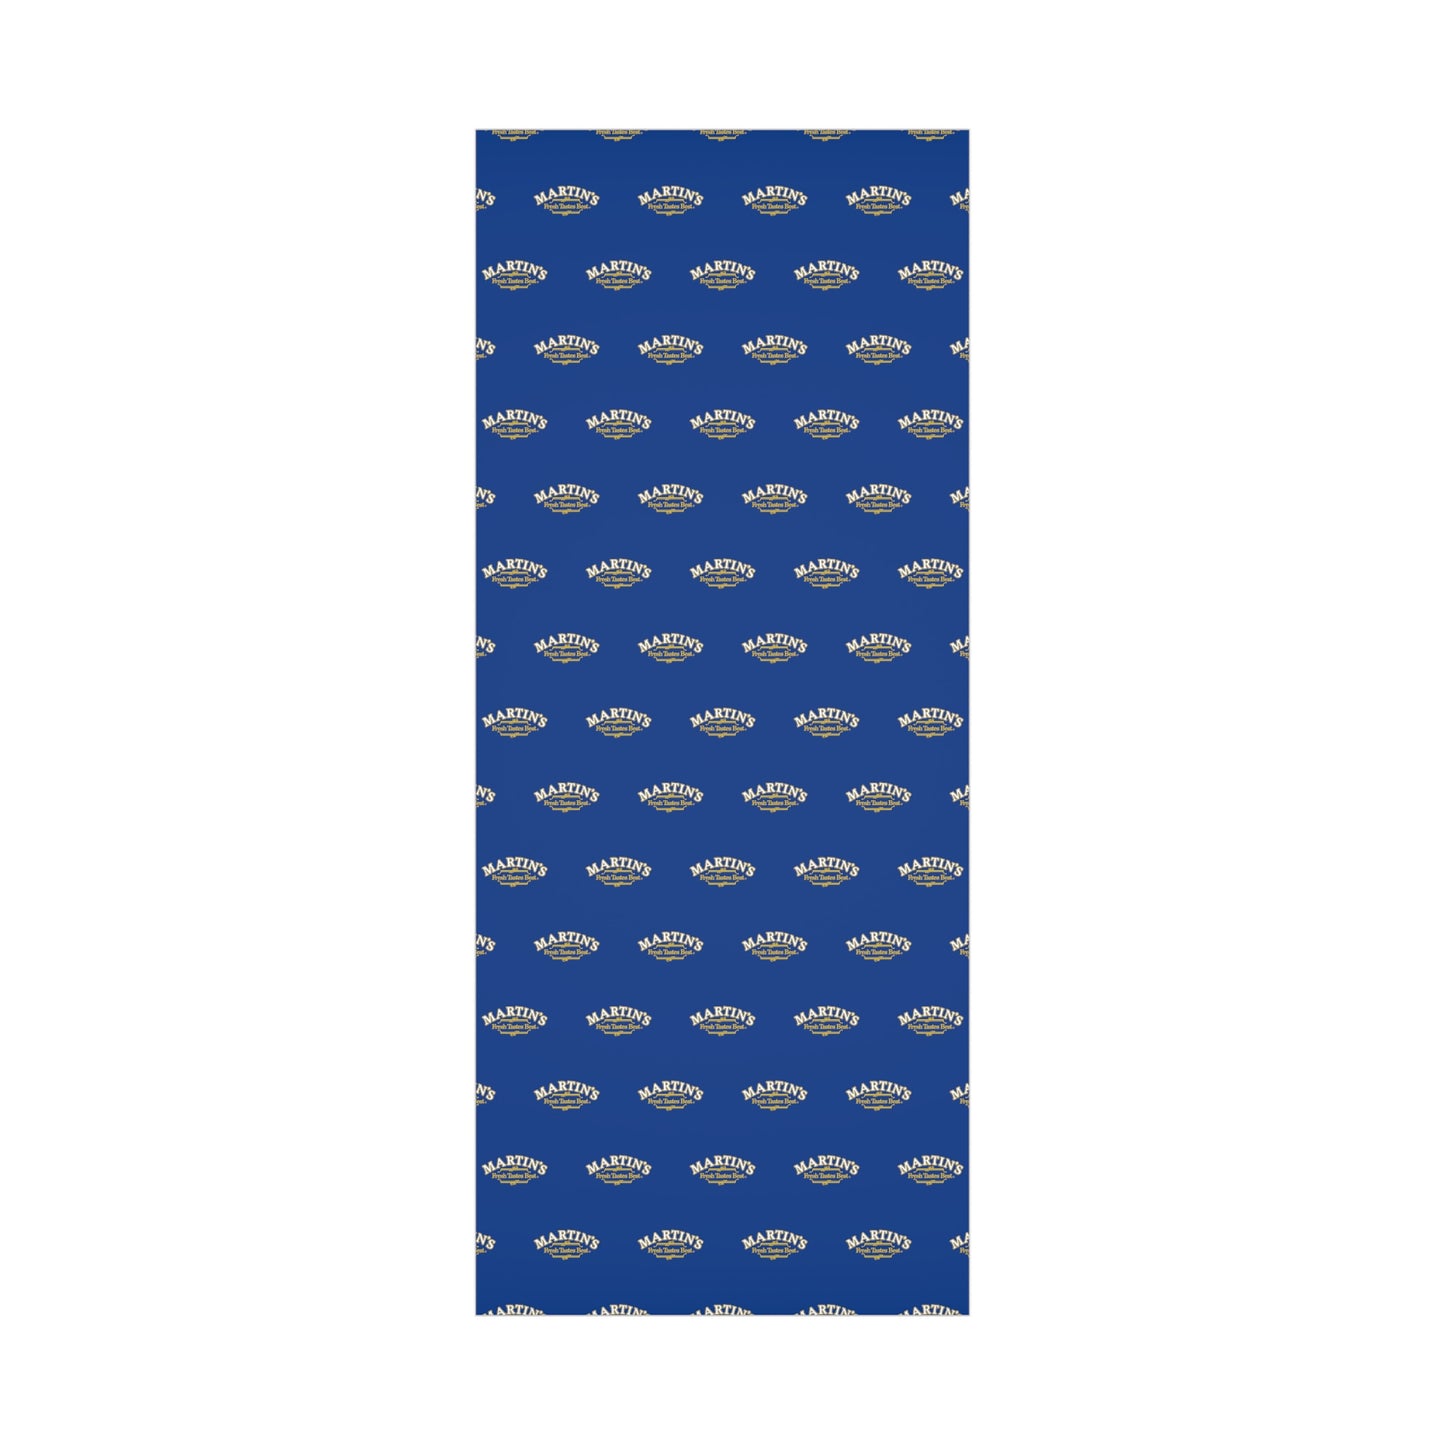 Blue Martin's Logo Gift Wrapping Paper